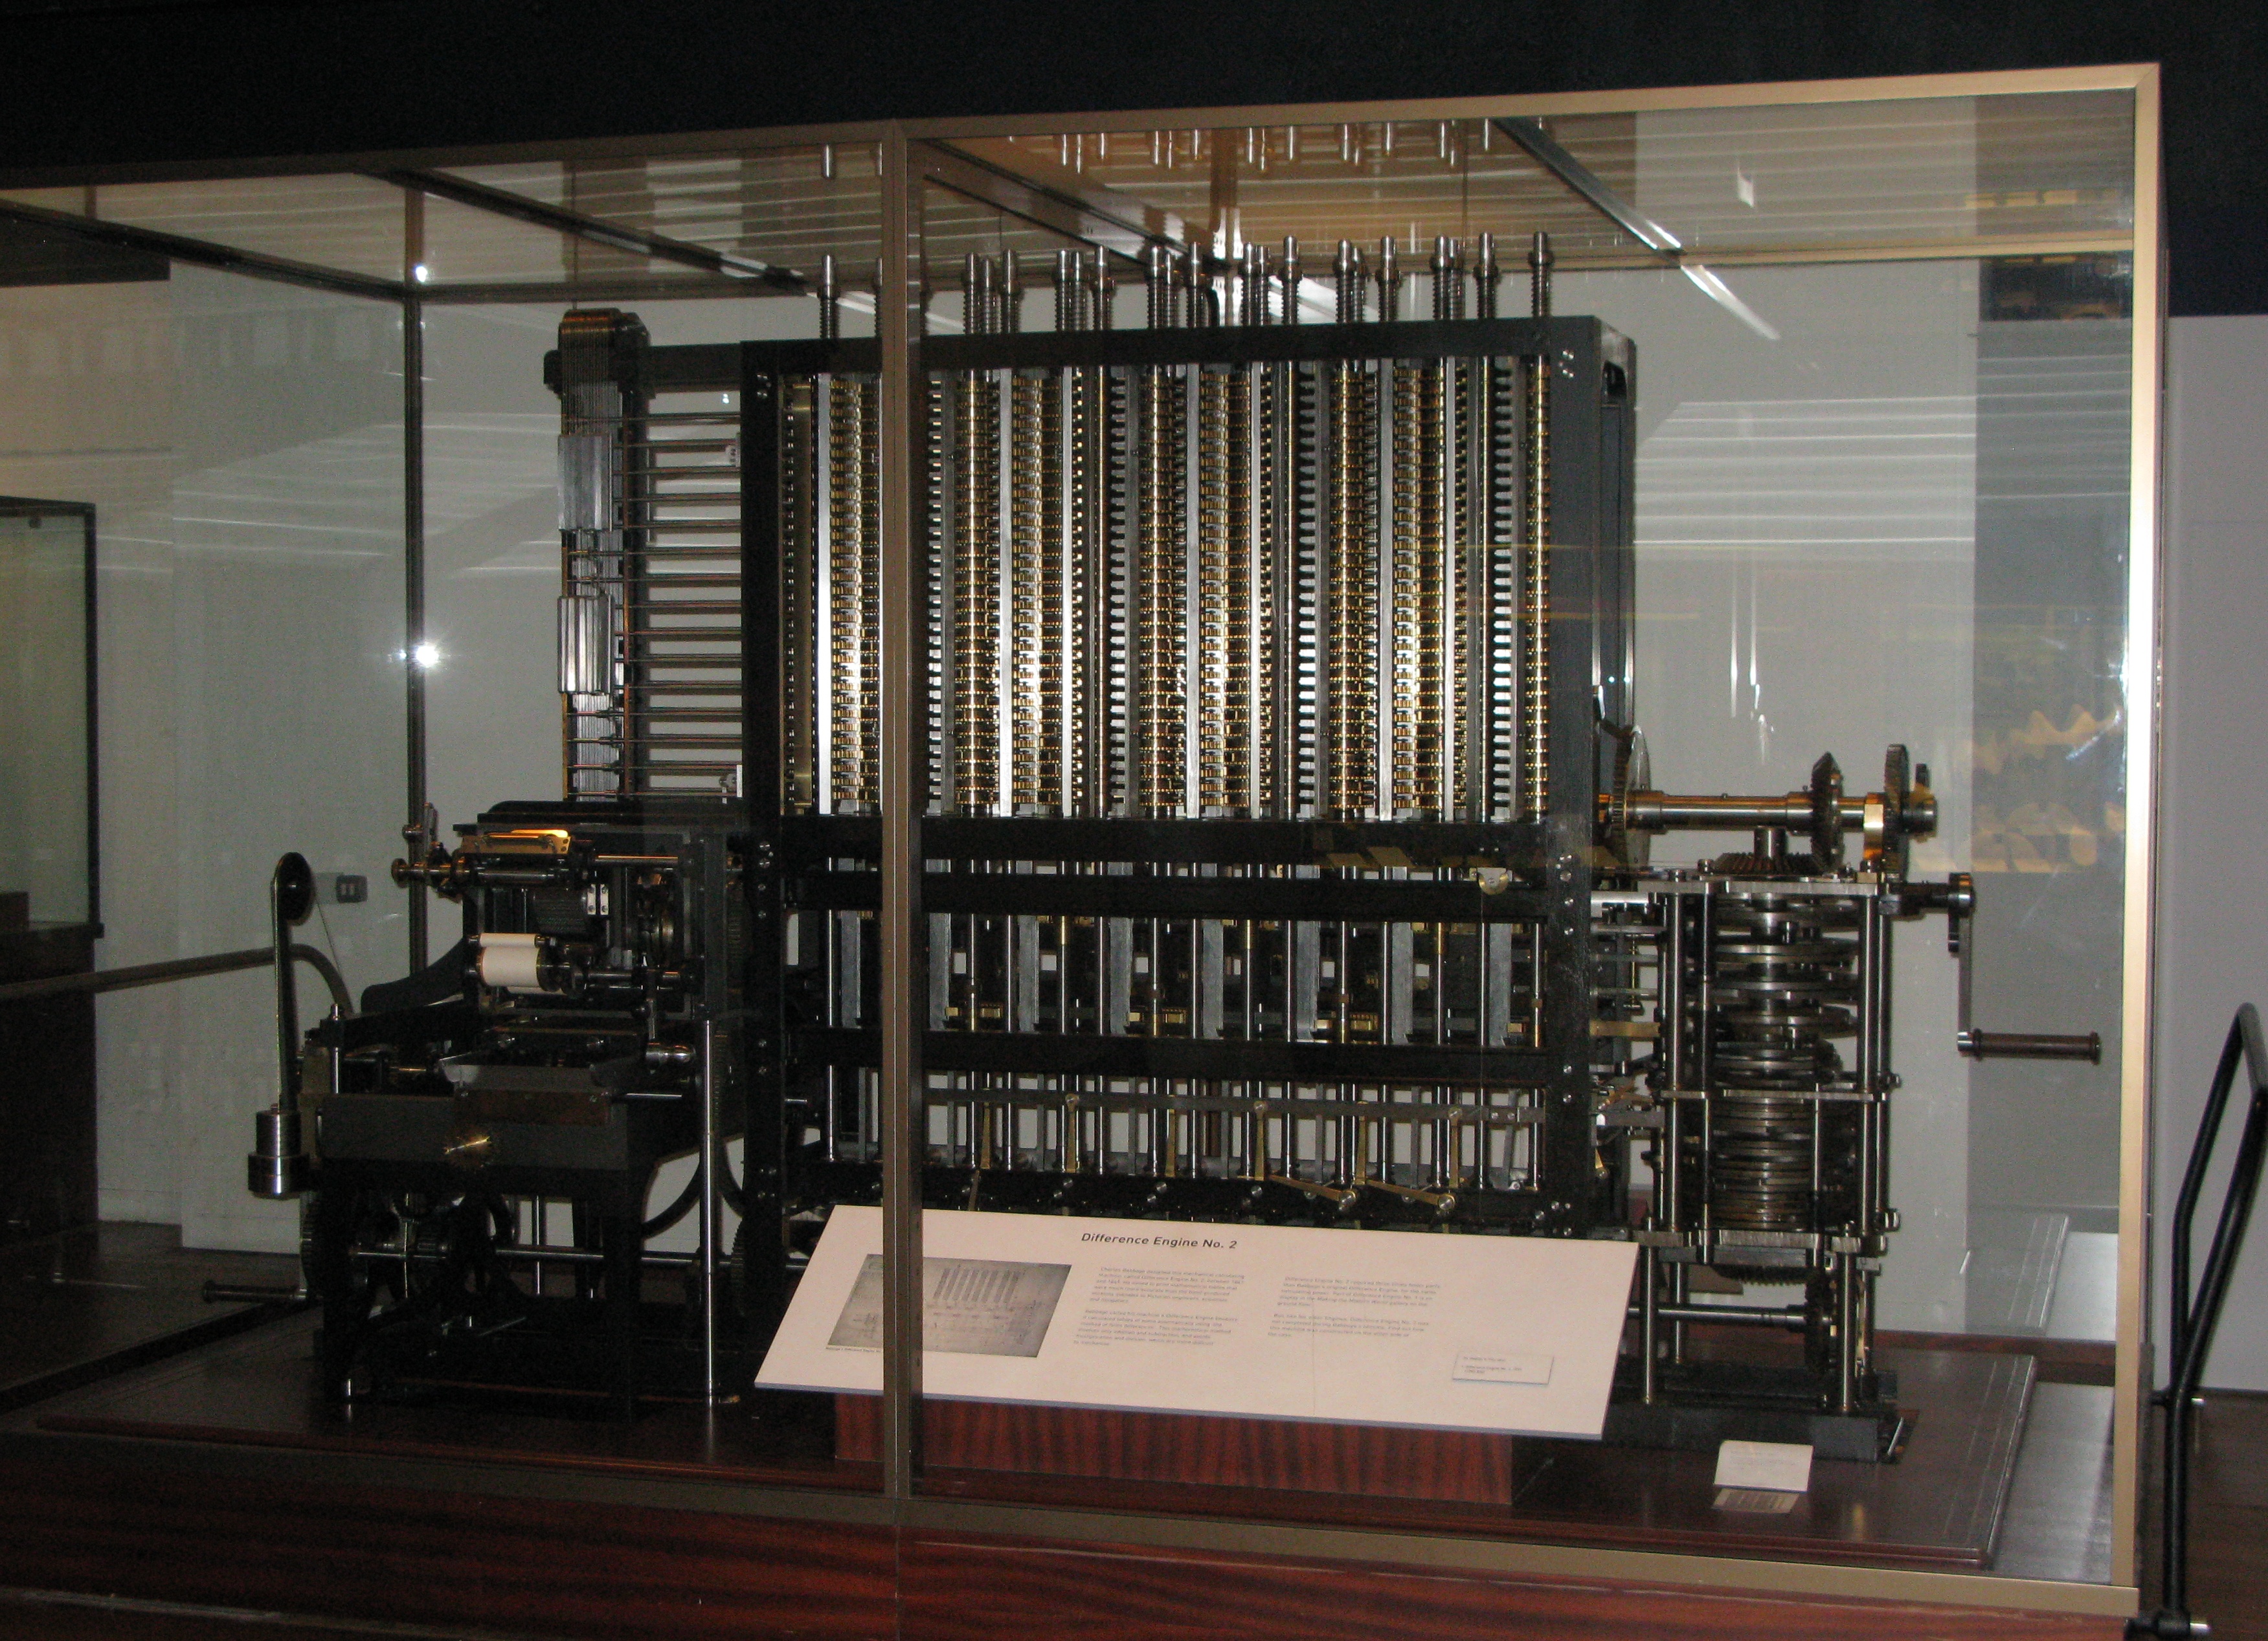 The Difference Engine at the London Science Museum: the image shows a large mechanical device with many gears and a large crank on the side.